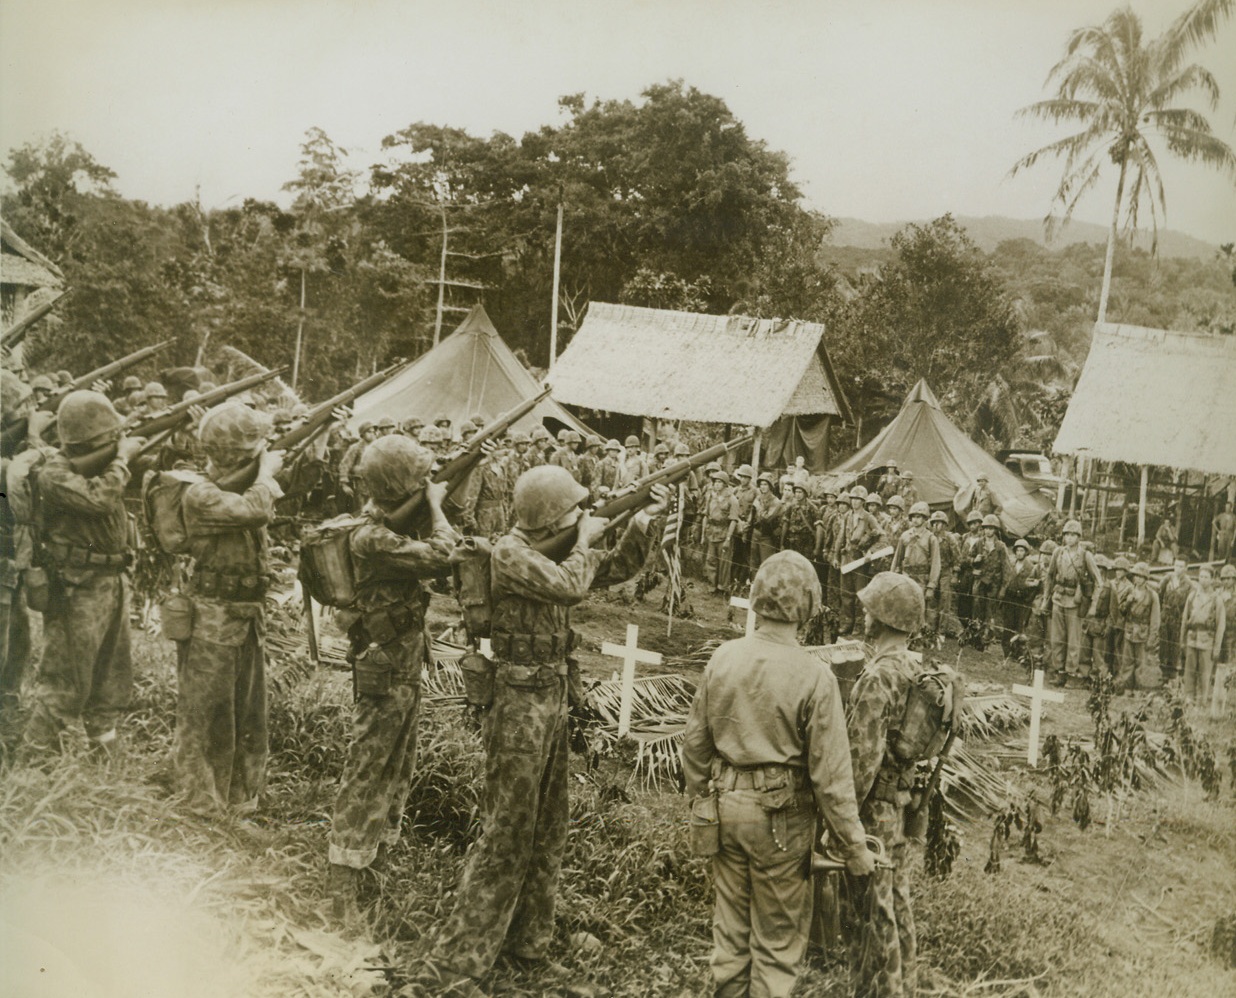 Leathernecks Honor Their Dead, 8/30/1943. New Georgia – Clad in camouflage suits, members of the U.S. Marine Corps pay tribute to buddies who lost their lives in action at Viru Harbor, New Georgia.  In foreground the rifle squad stands ready to blast a salute to the fallen Marines, while a bugler waits to play the final “Taps”. Credit (U.S. Marine Corps photo from ACME);